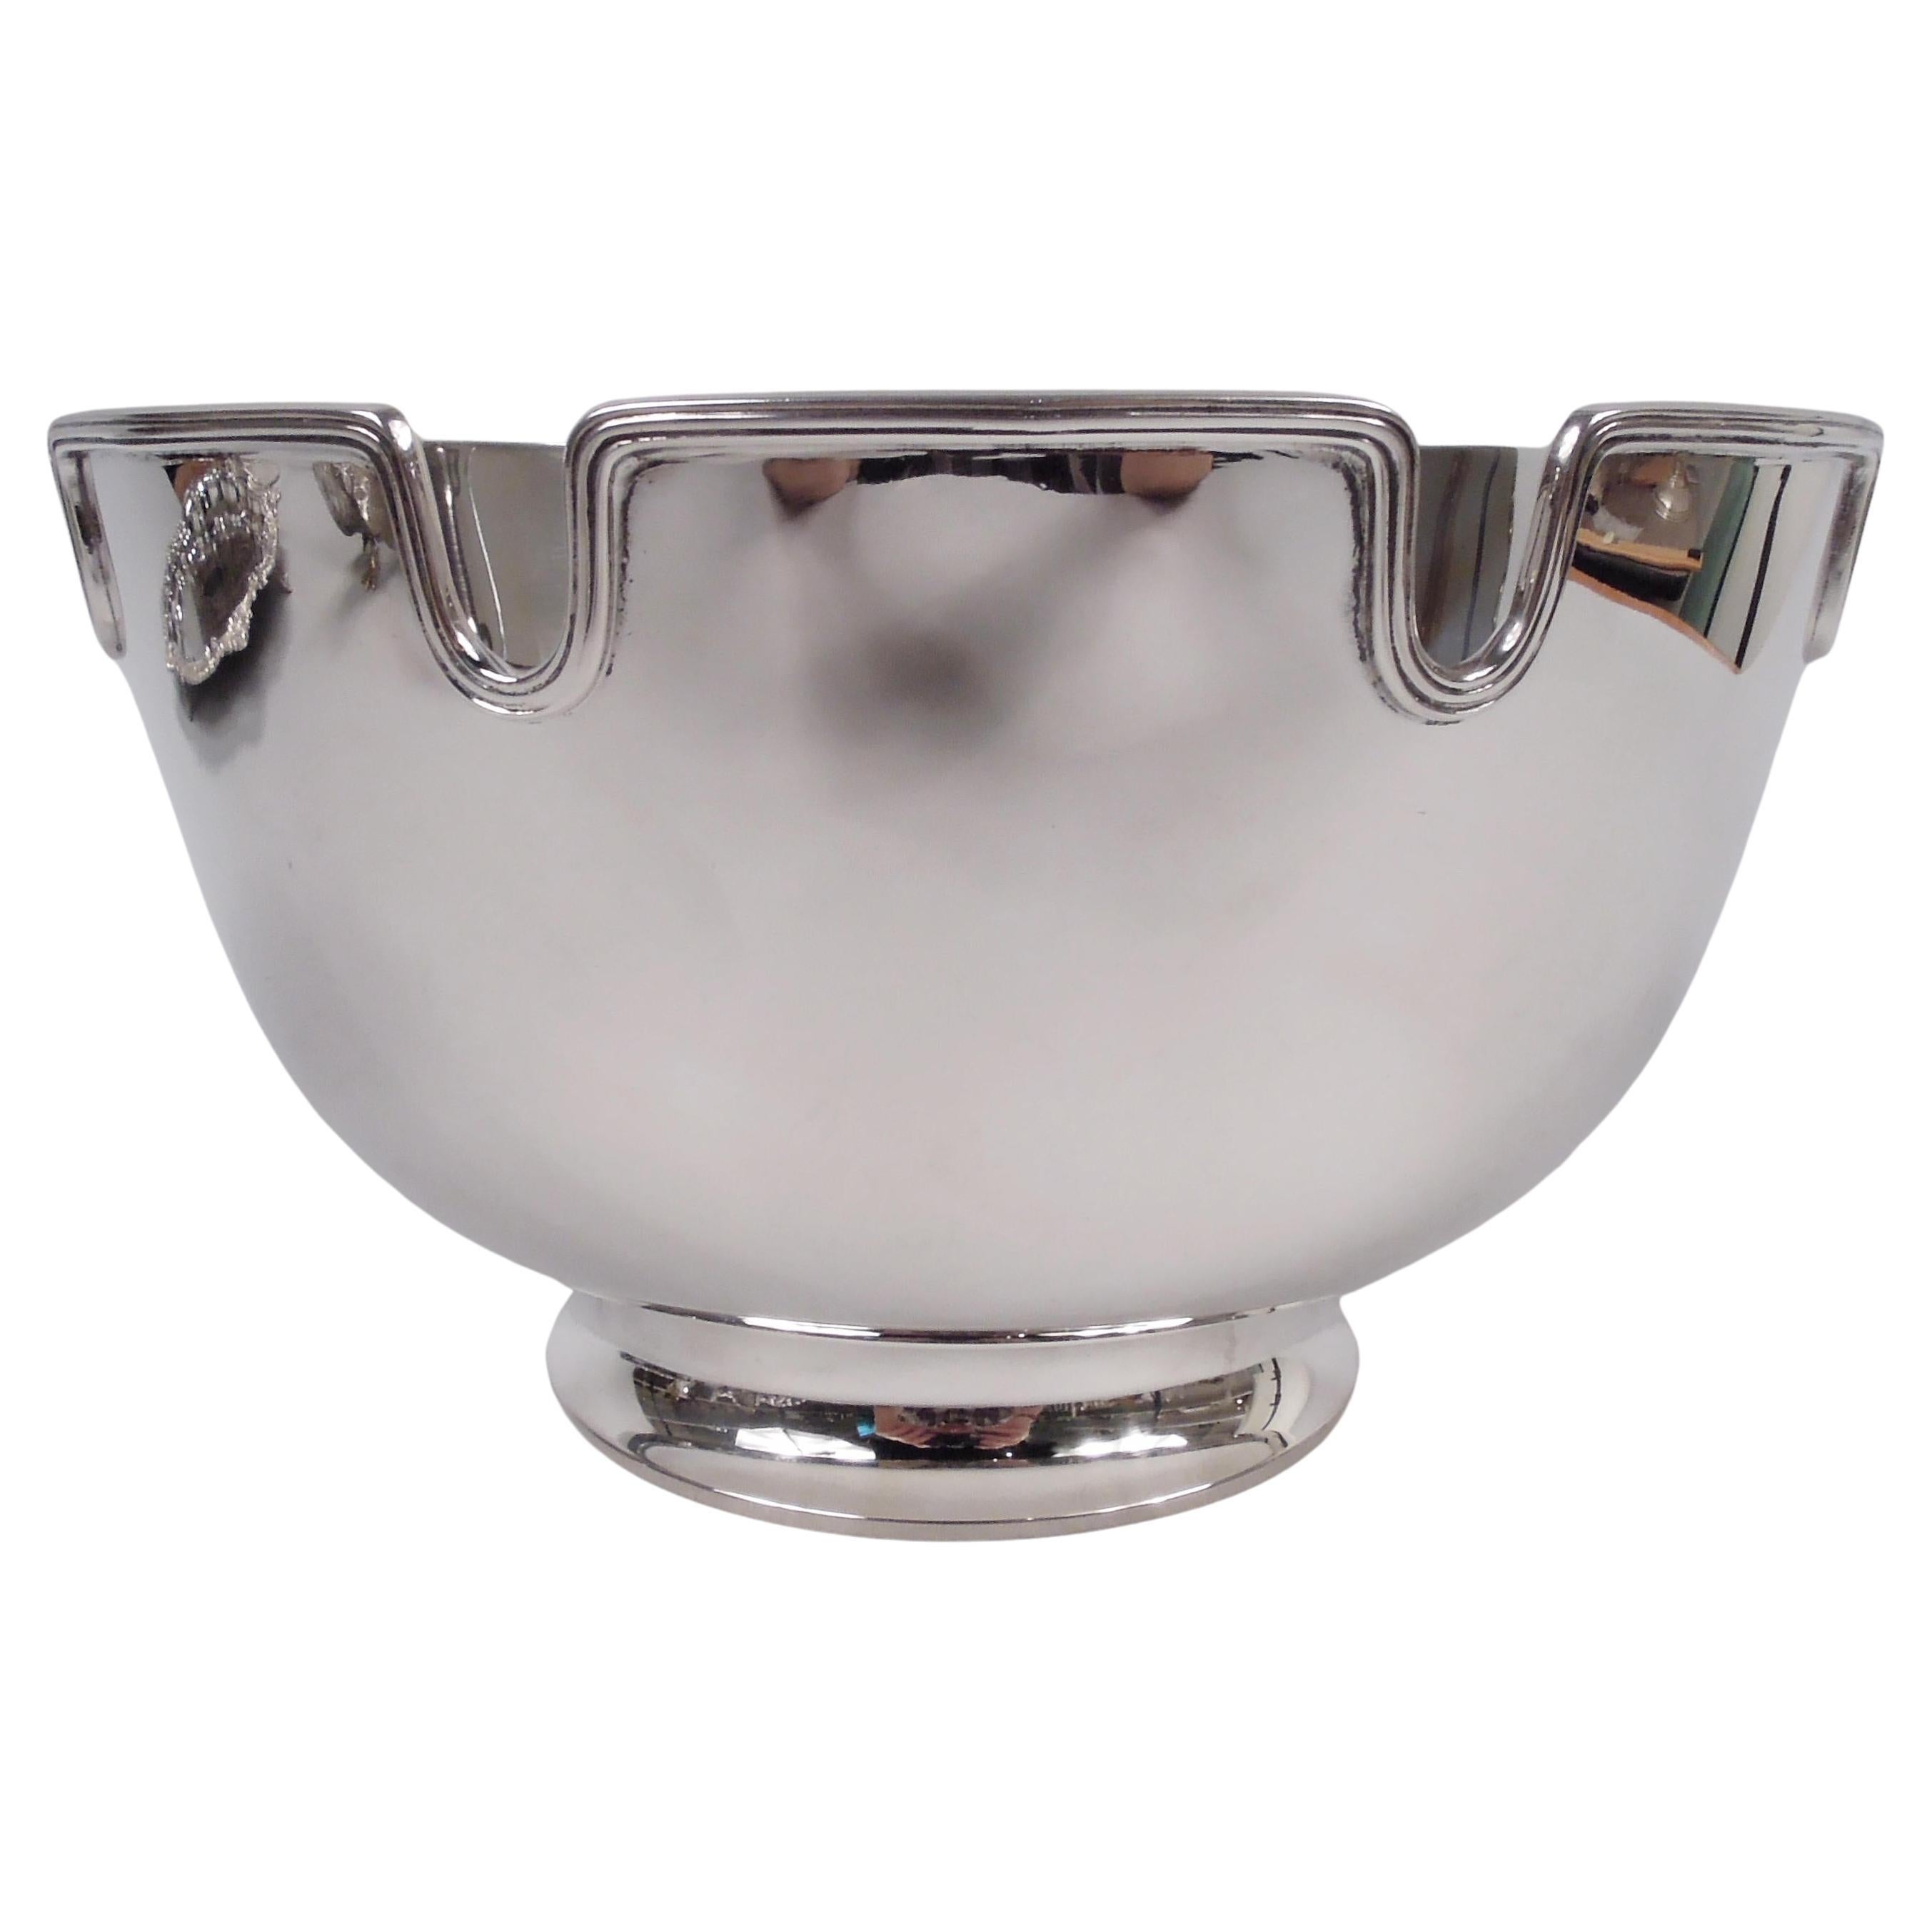 Tiffany Midcentury Modern Sterling Silver Monteith Bowl